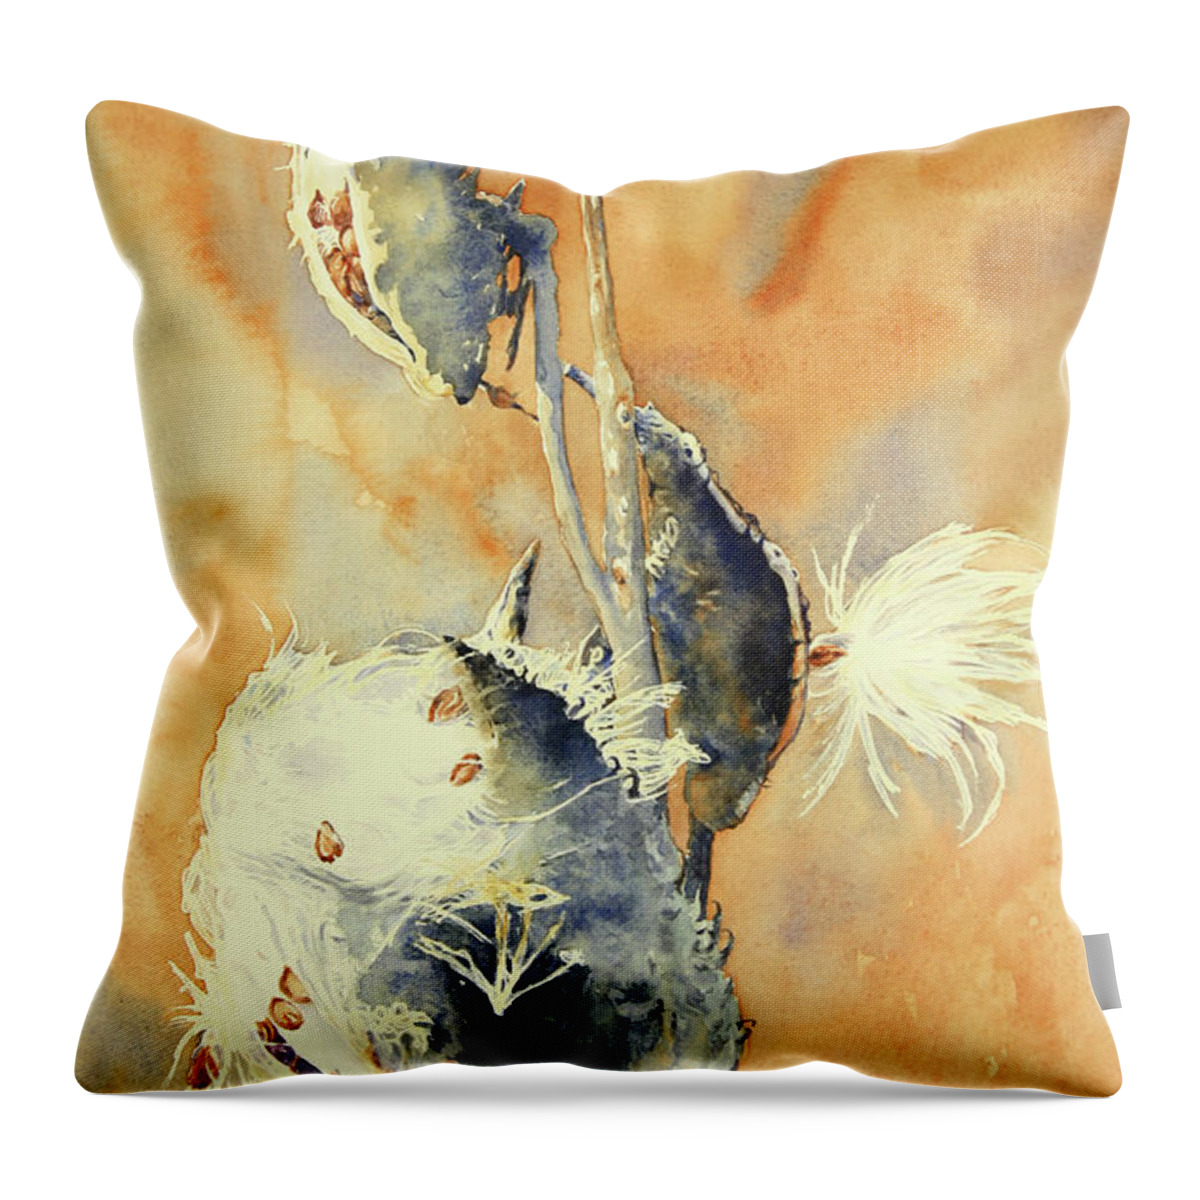 Milkweed Throw Pillow featuring the painting Blowing in the Wind by Brenda Beck Fisher